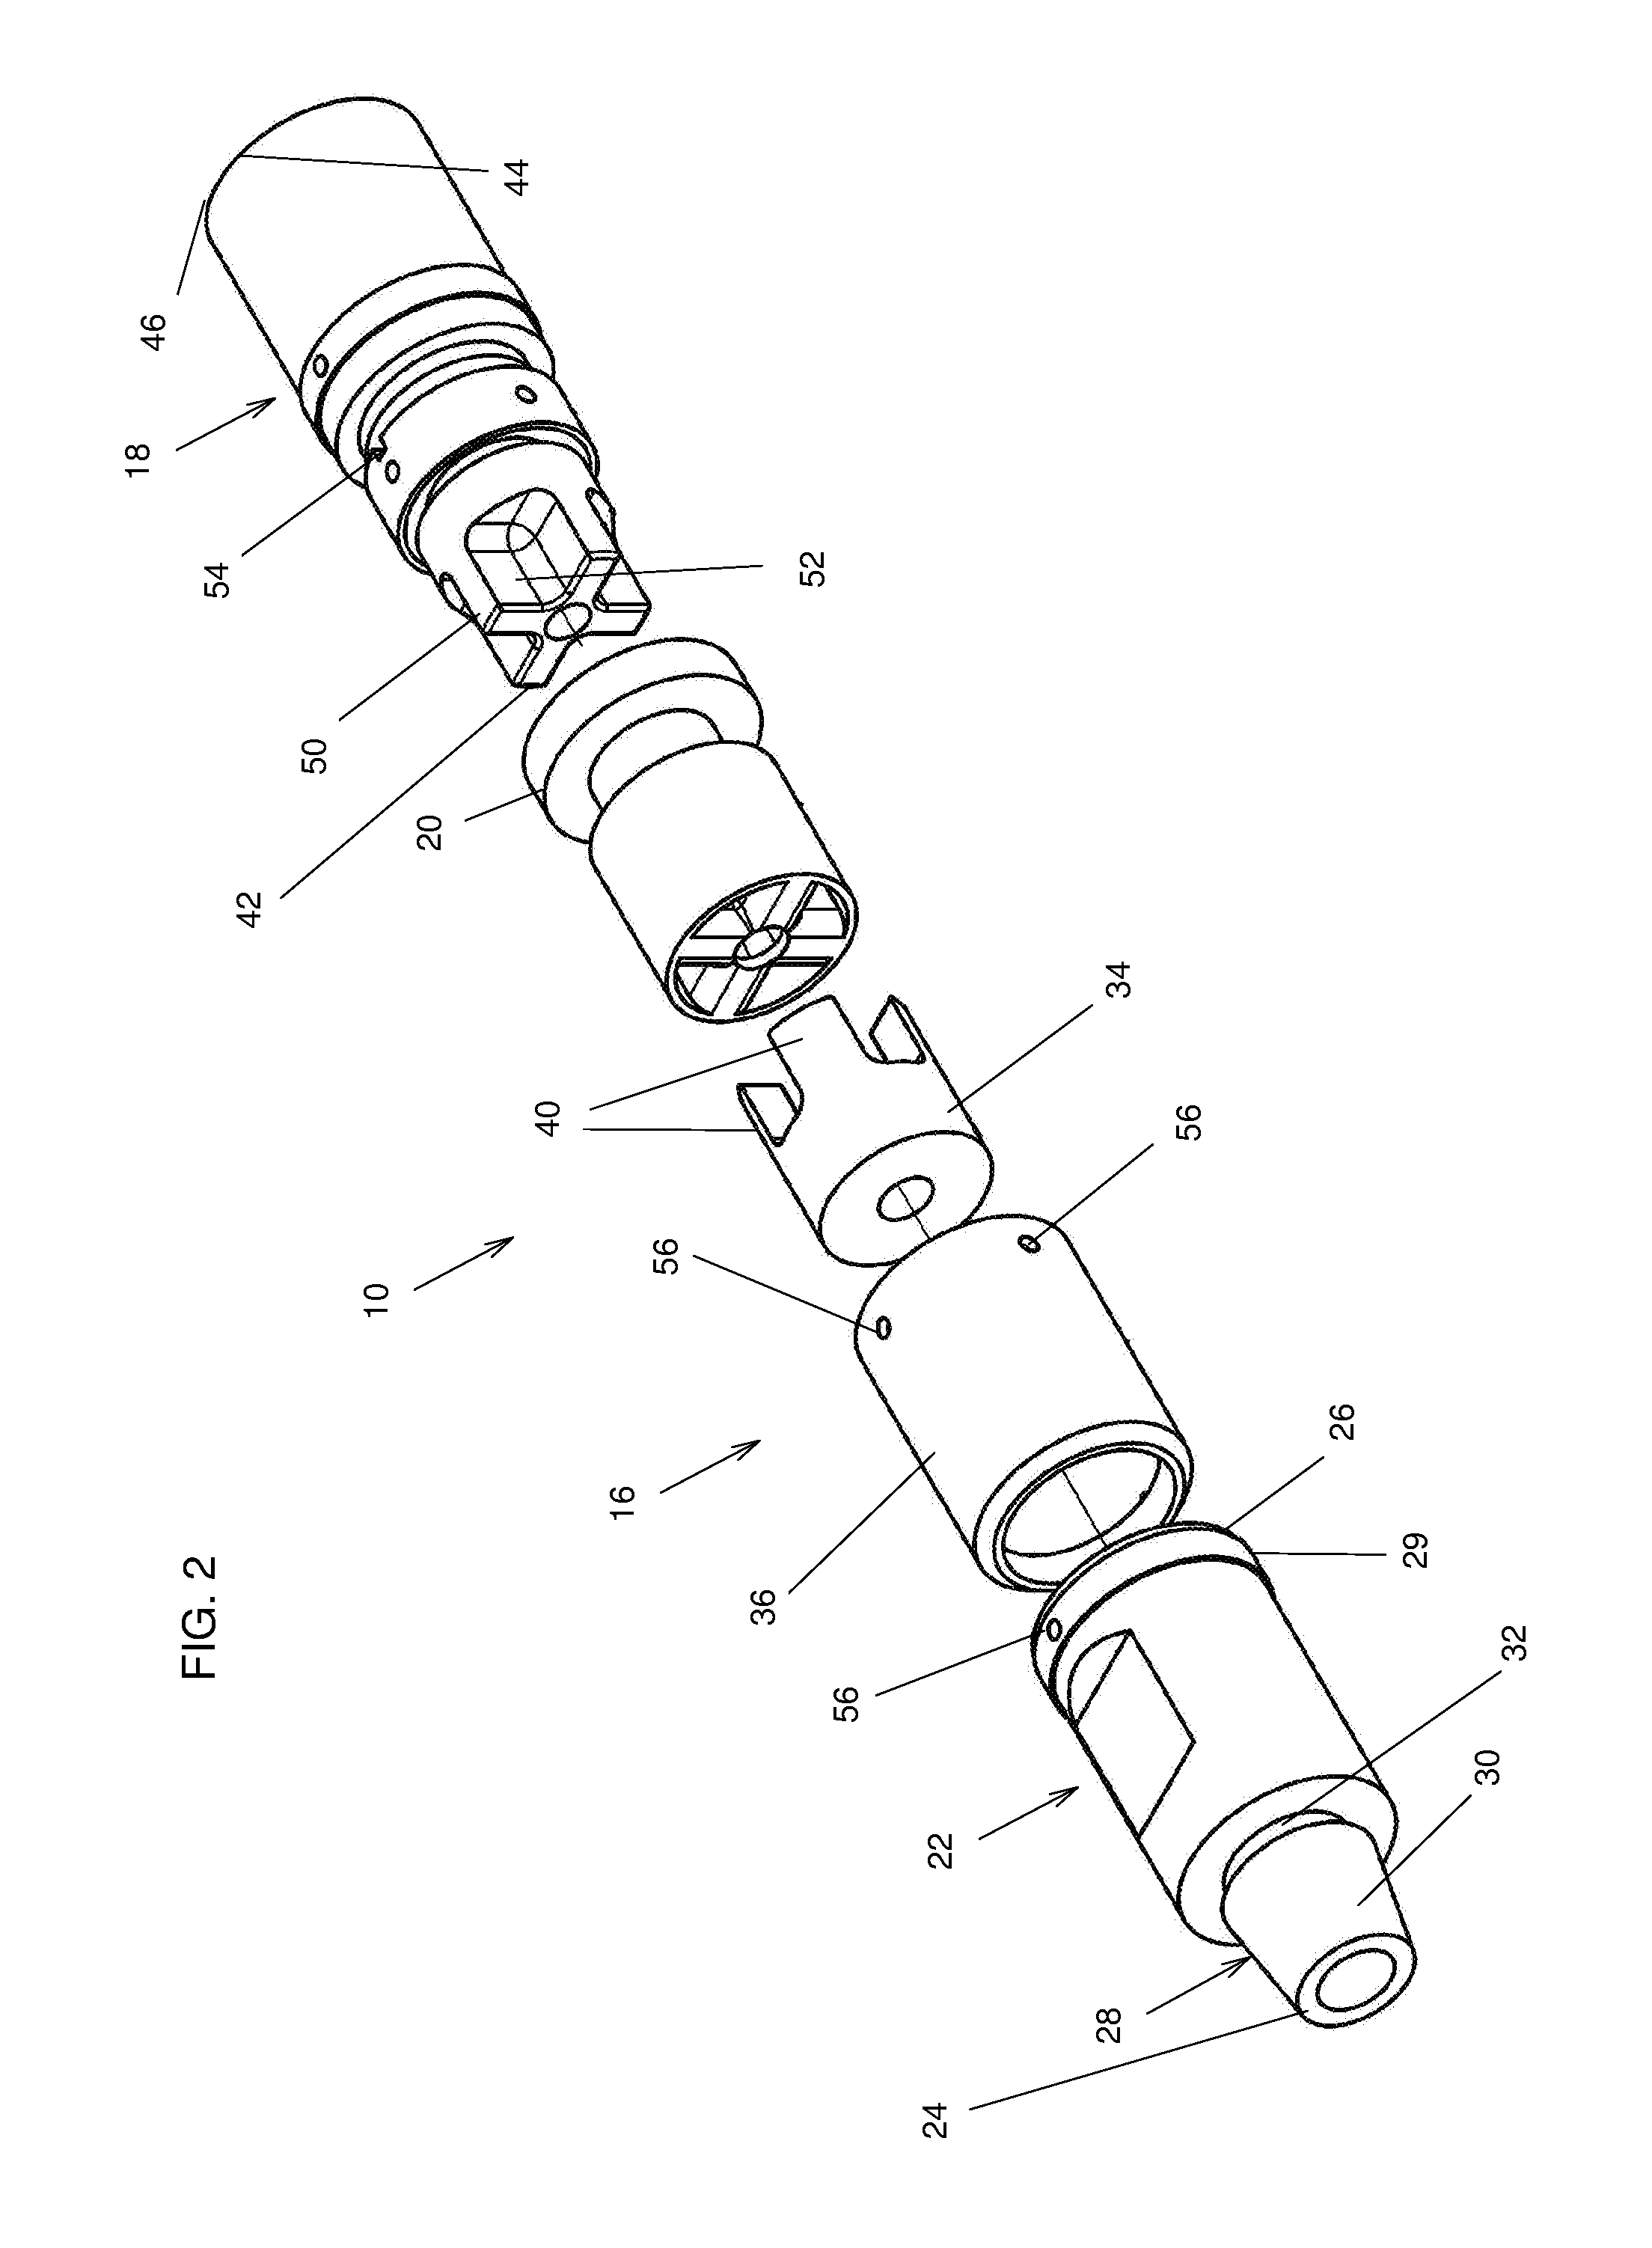 Sound absorber for a drilling apparatus